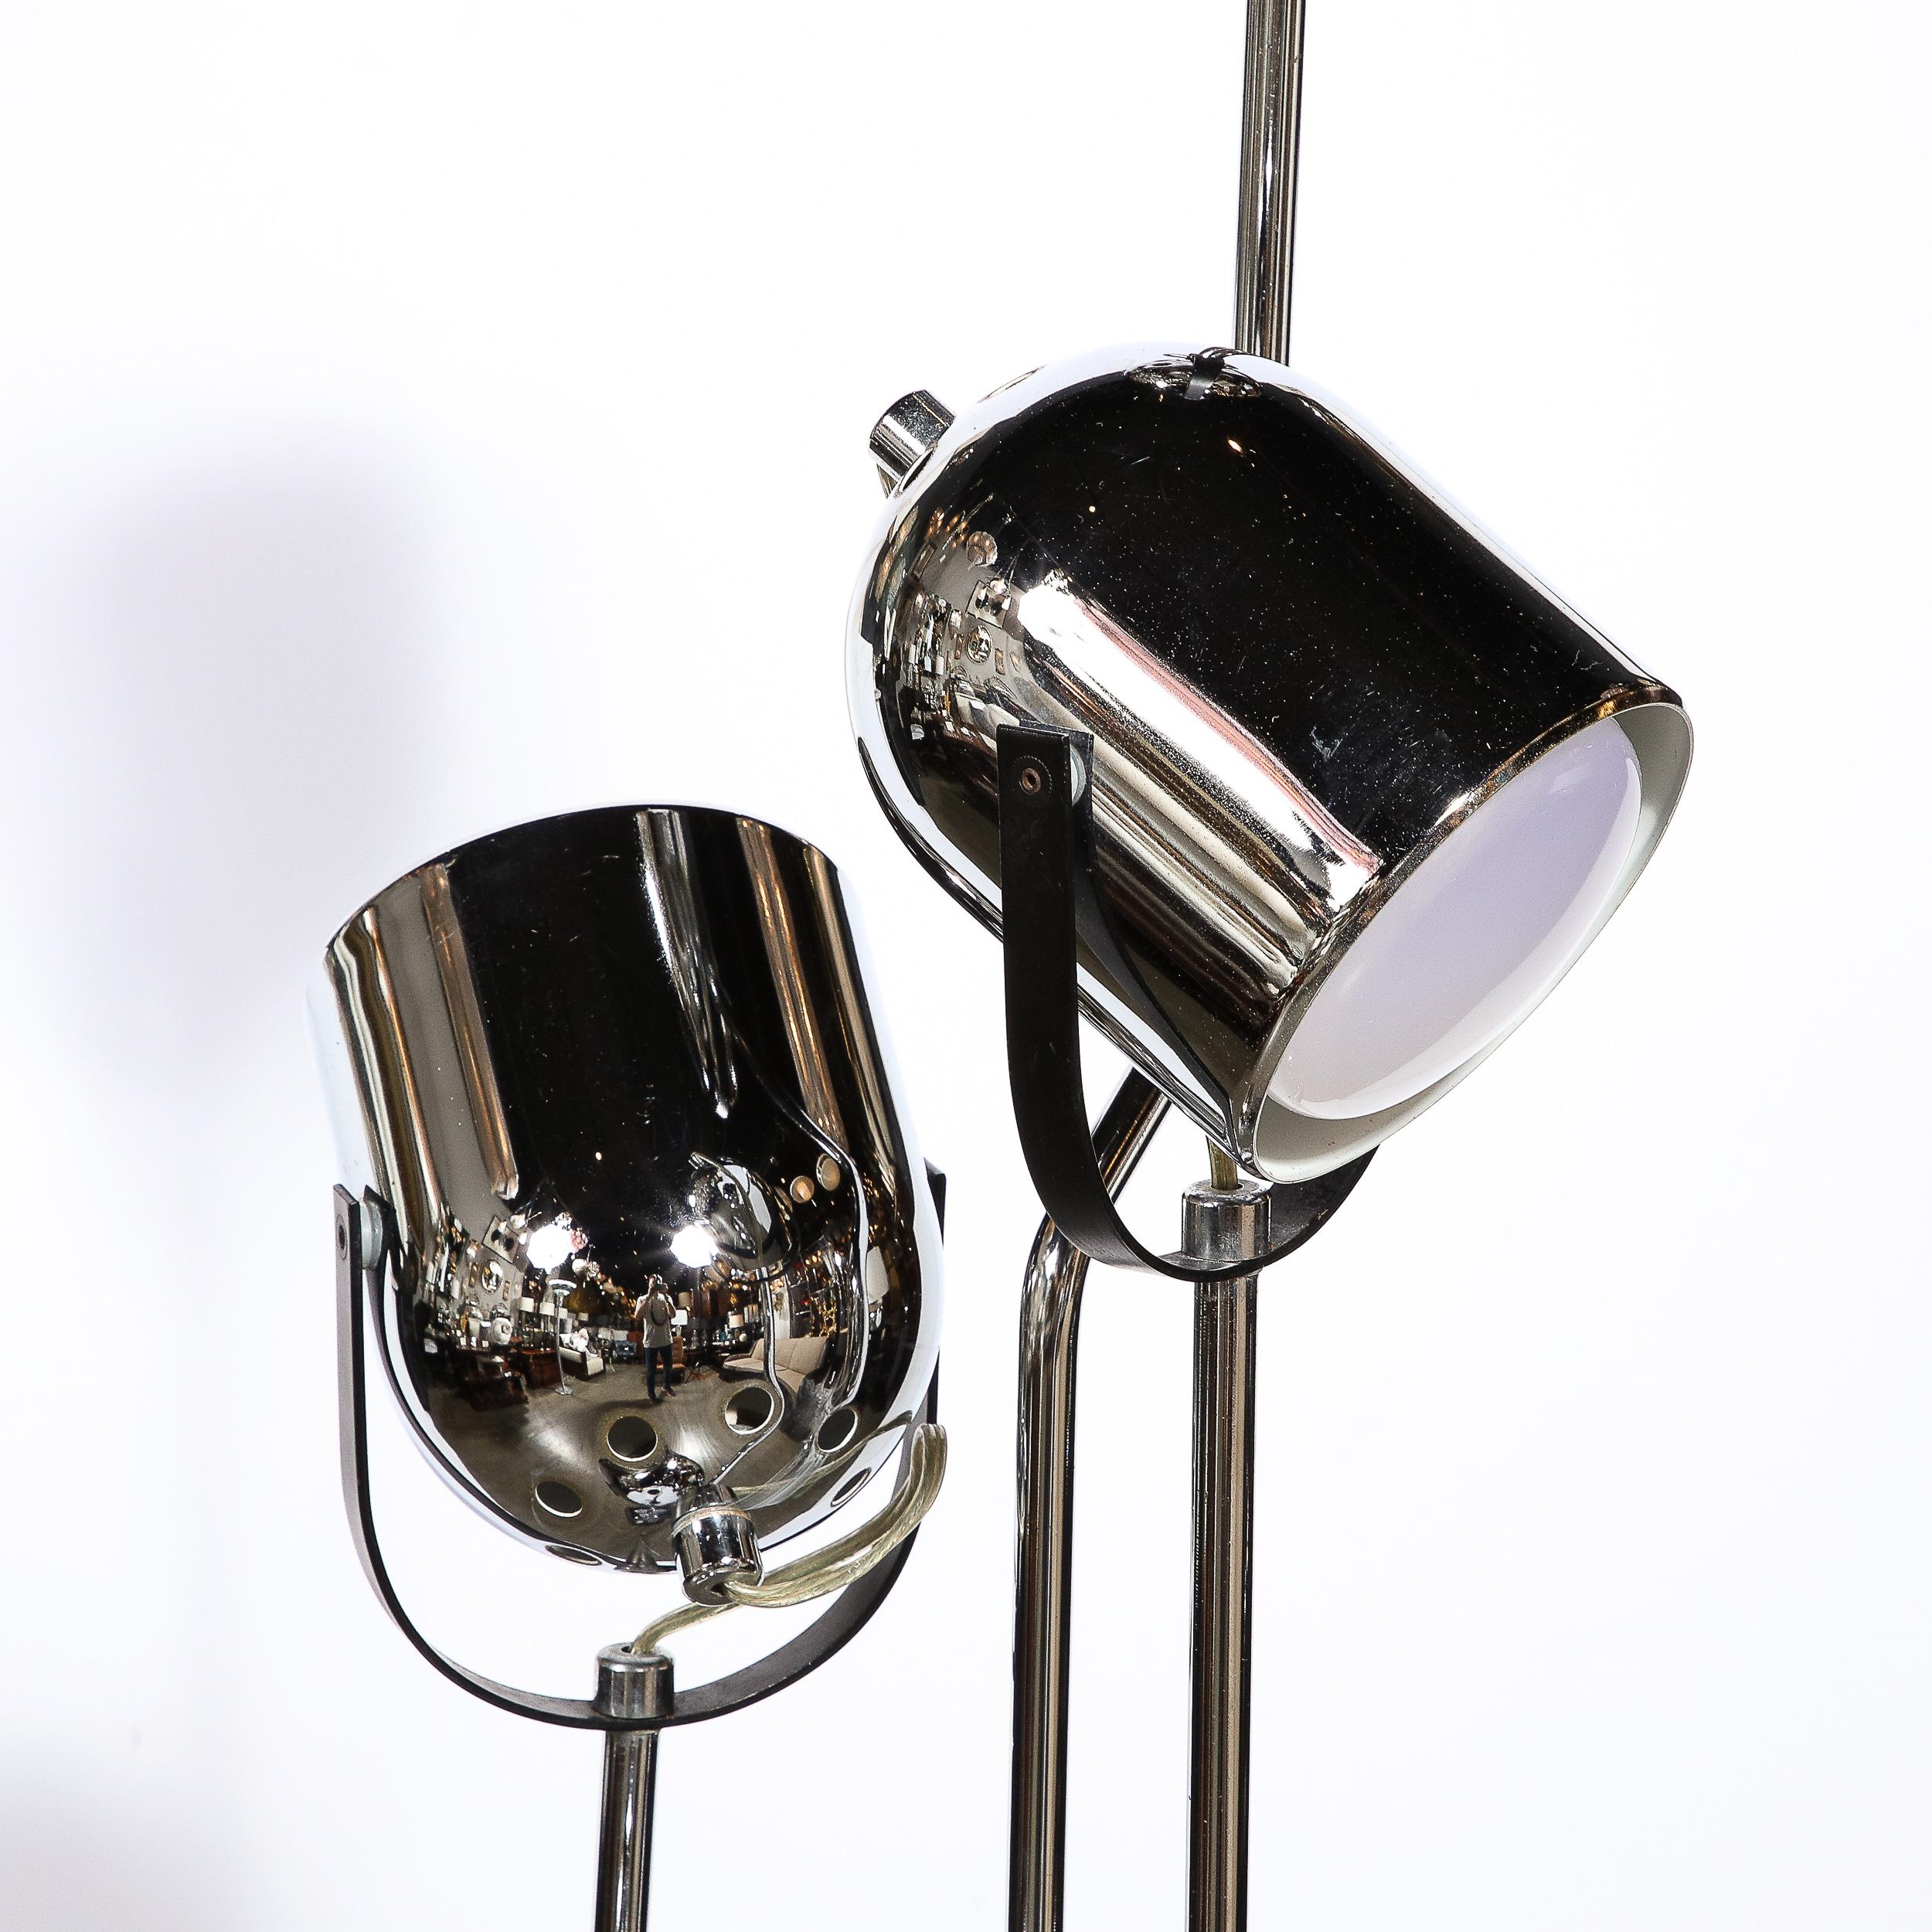 This refined Mid-Century Modern chrome and black enamel floor lamp was realized in the United States circa 1970. Four serpentine zig zagging cylindrical chrome supports ascend from a volumetric rectangular base culminating in cupped concave shades-